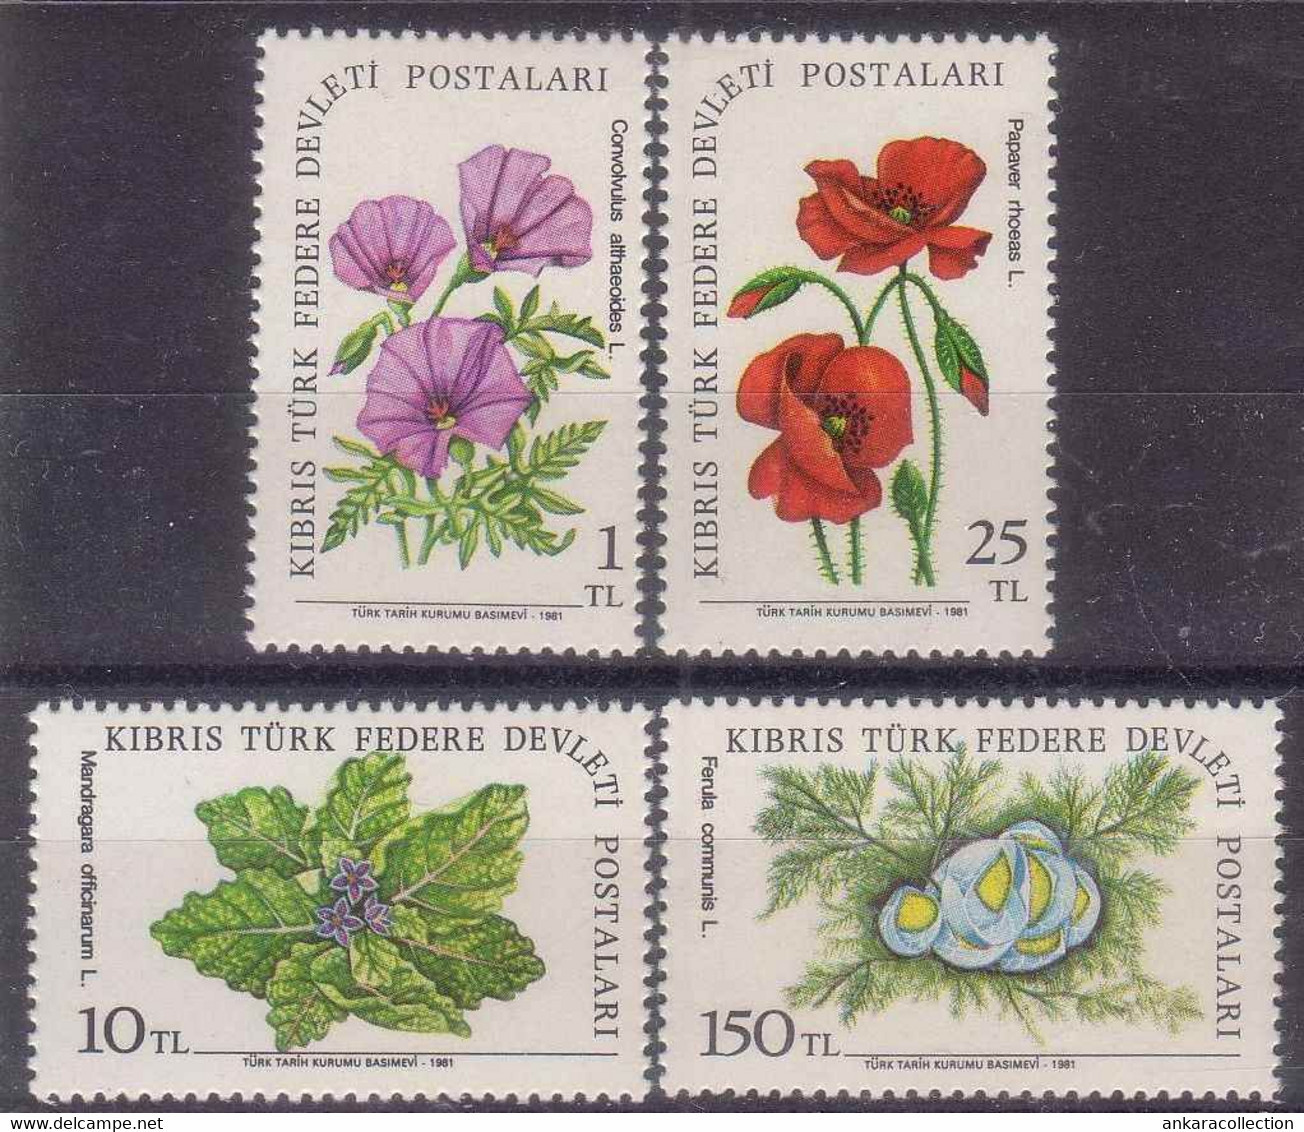 AC - NORTHERN CYPRUS STAMP - FIELD FLOWERS MNH 28 SEPTEMBER 1981 - Unused Stamps